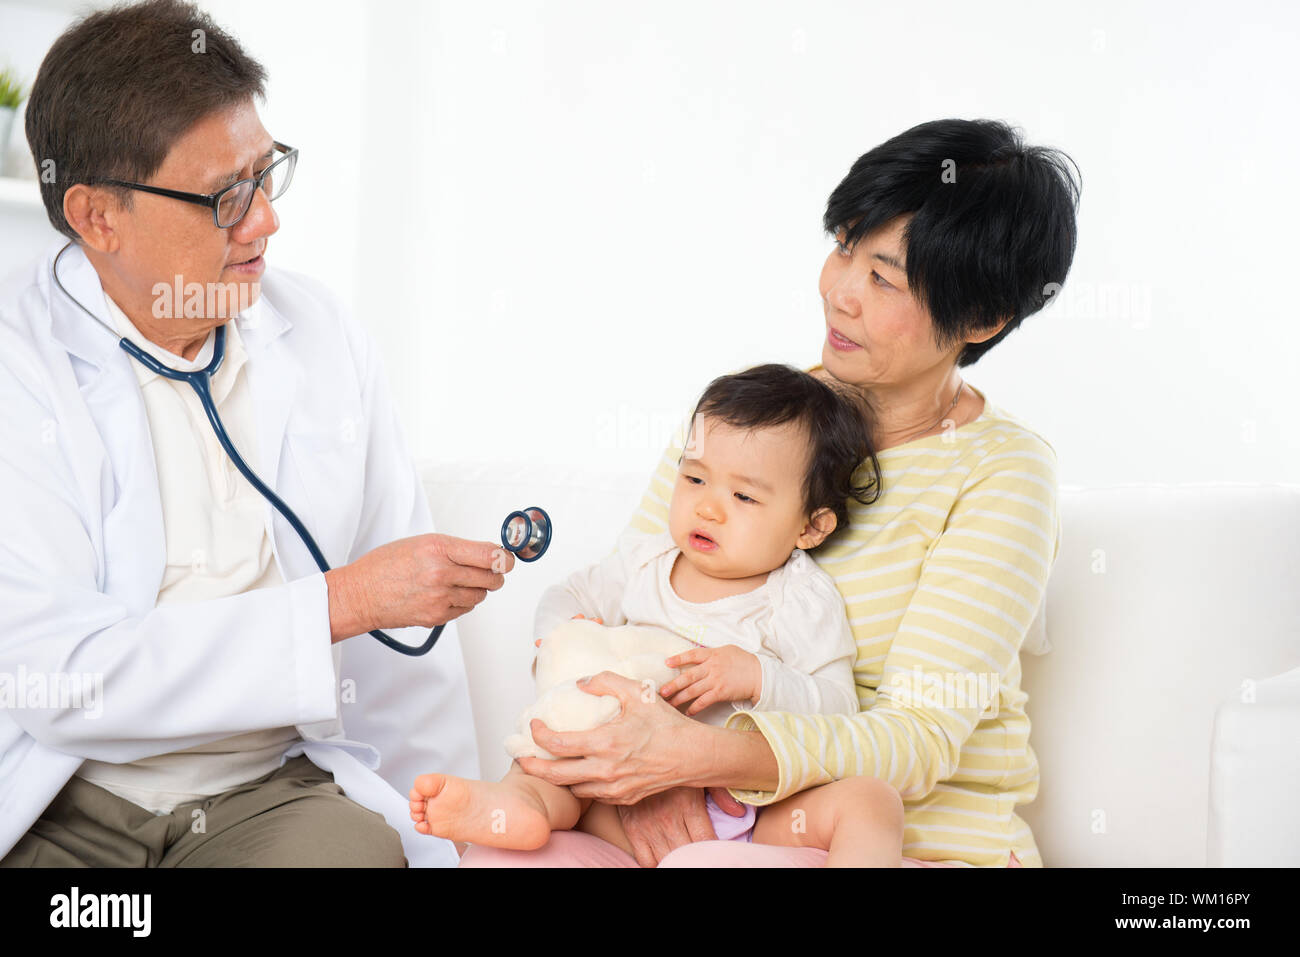 Family doctor examining baby girl. Pediatrician and patient. Stock Photo